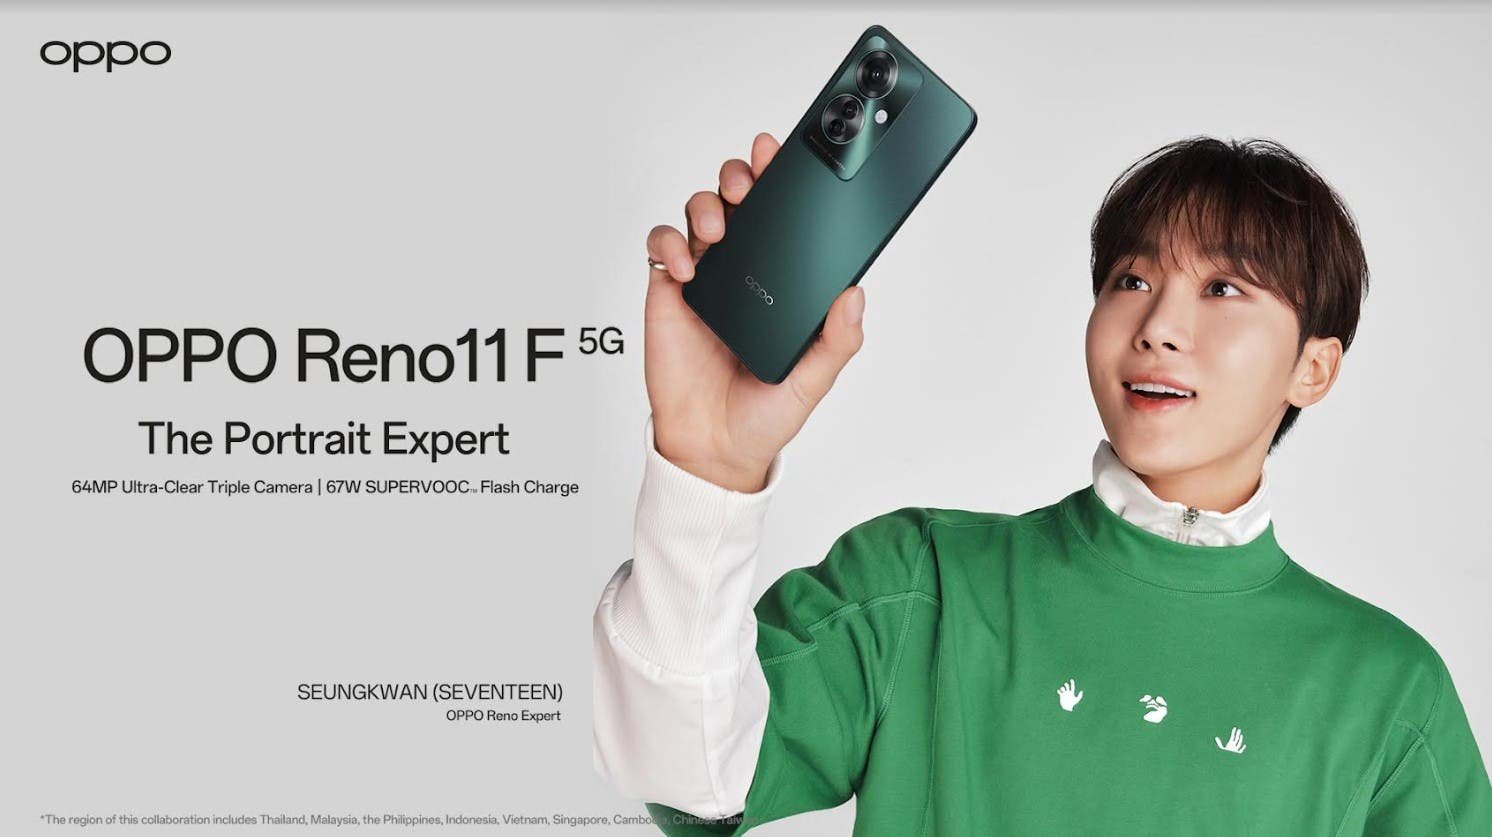 Kpop Artists BSS (SEVENTEEN) are the Newest OPPO Reno Experts